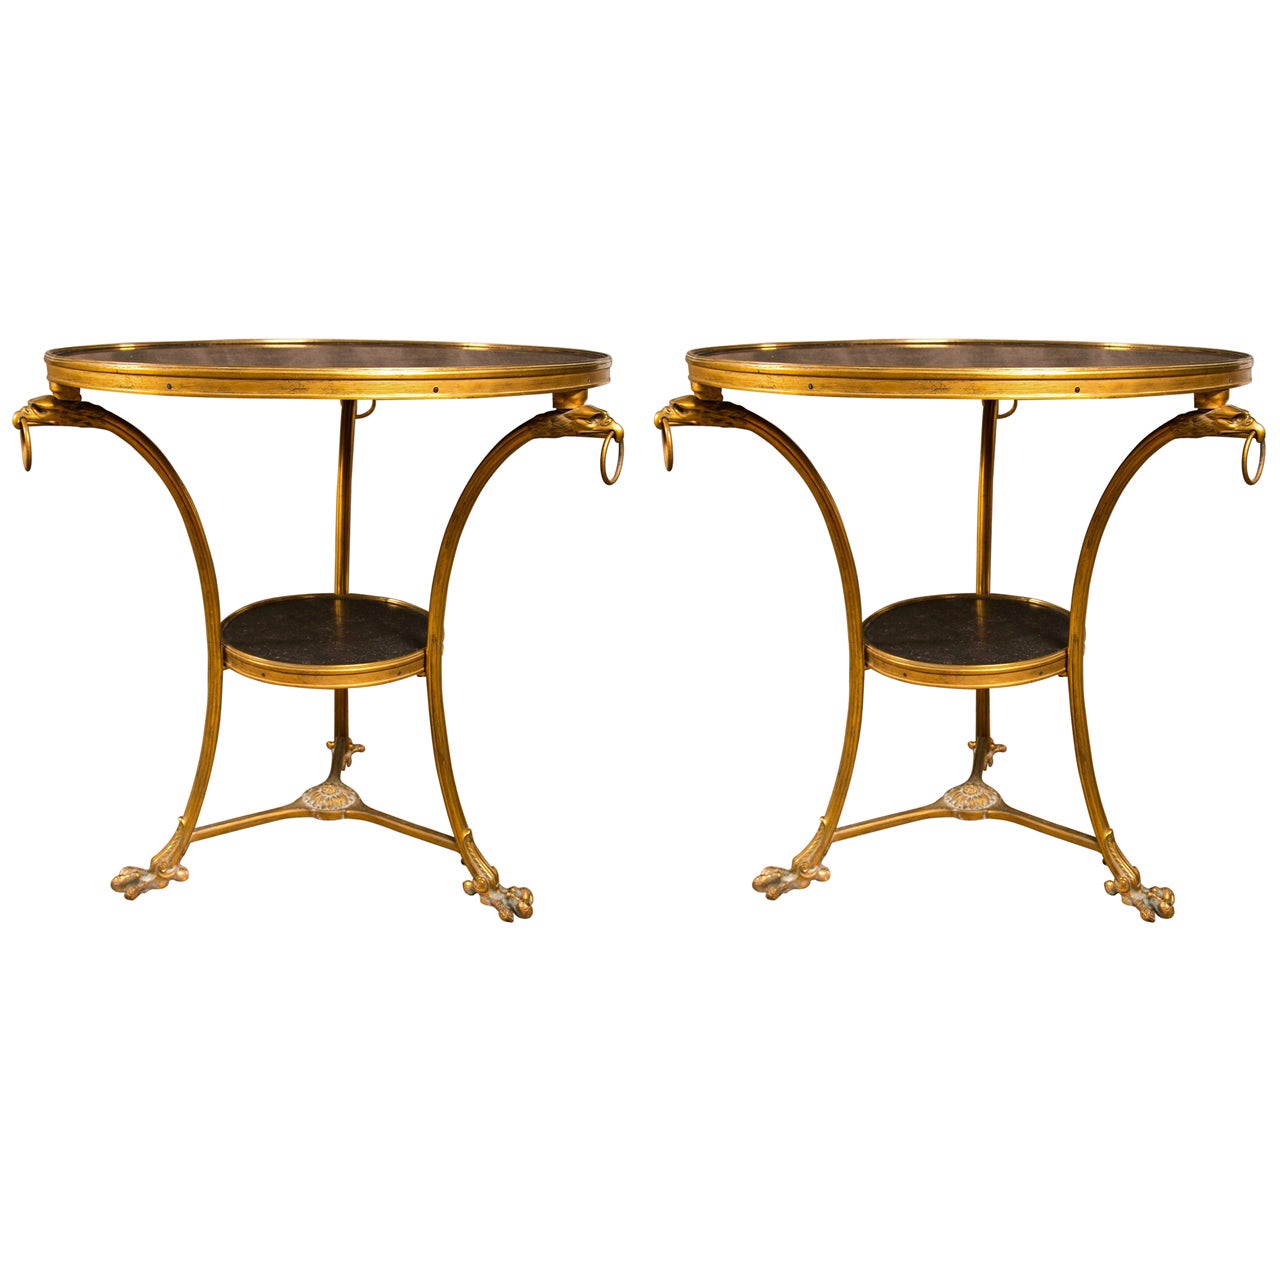 Pair of Empire Style Marble-Top Gueridons